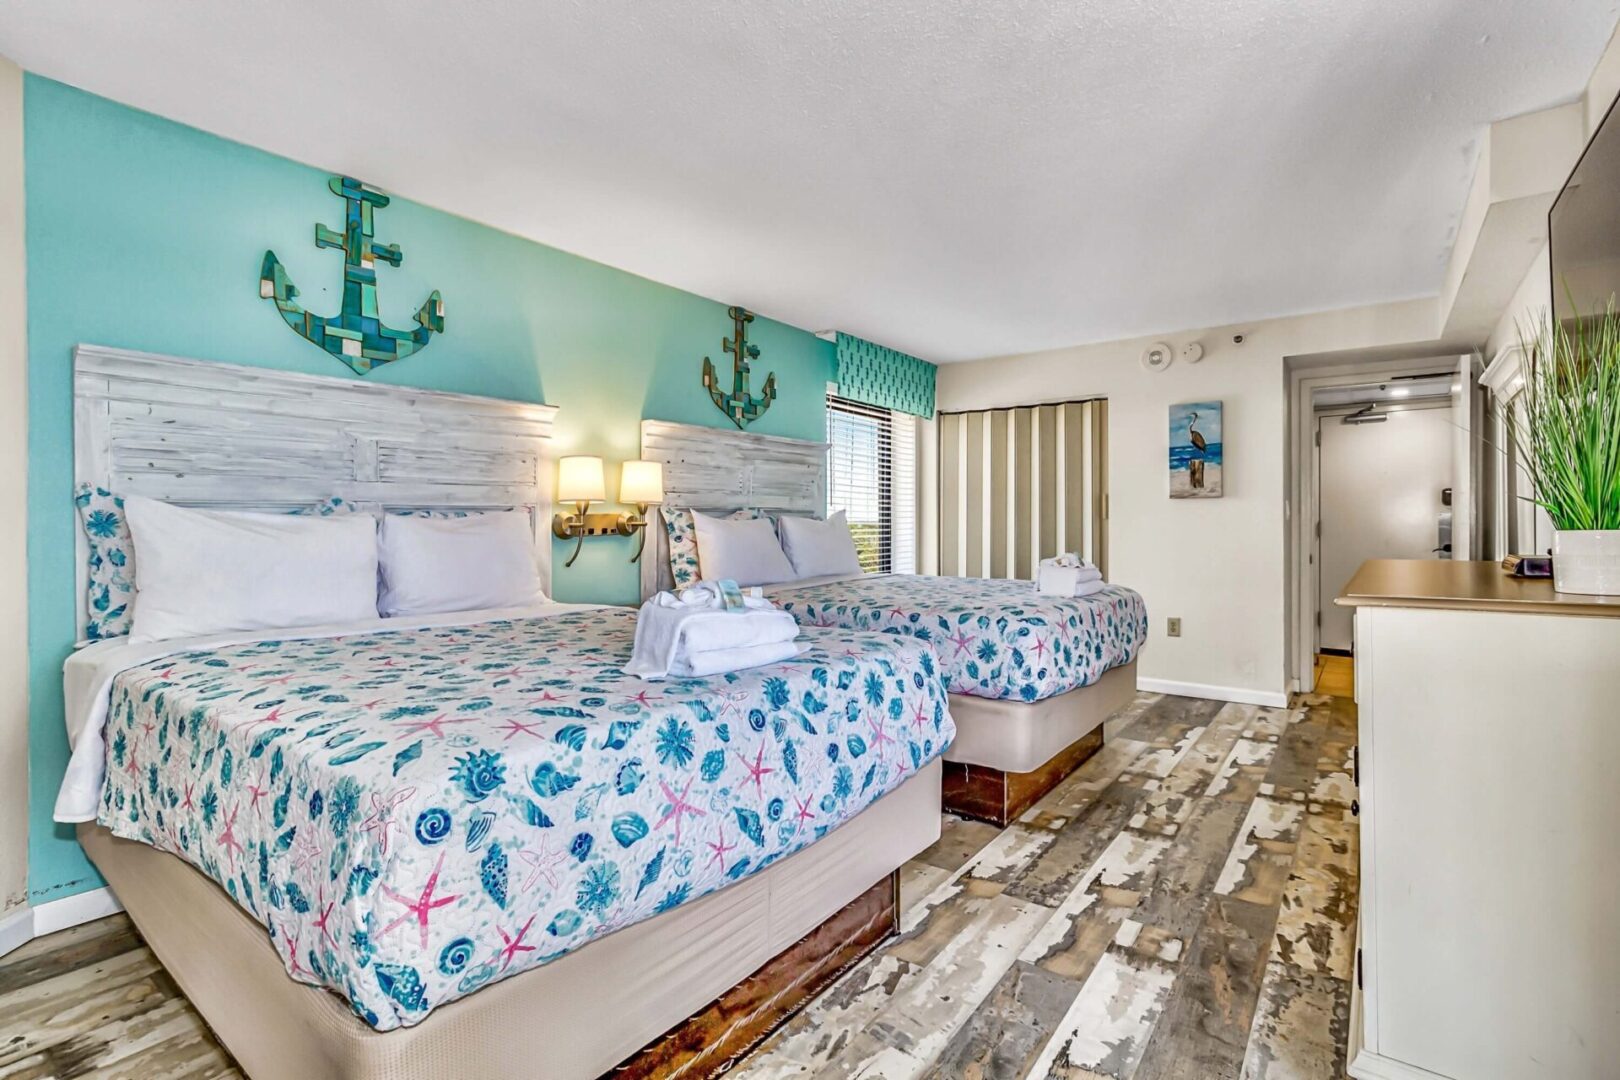 A picture double beds with anchor frames on the wall